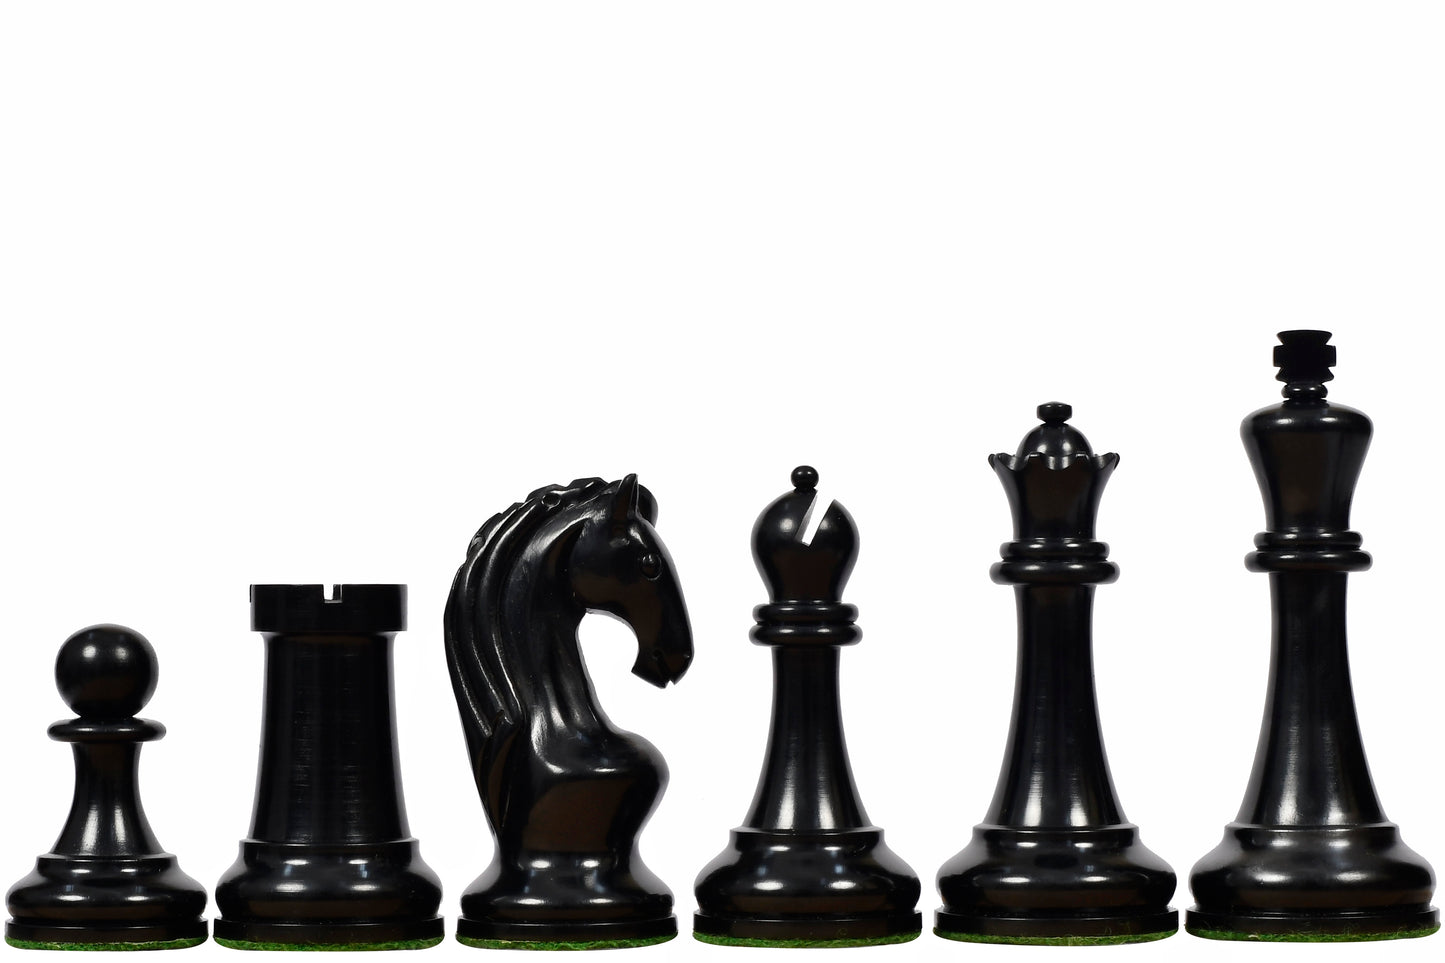 Reproduced 1963-1966 Piatigorsky Cup Chess Pieces in Ebony & Antiqued Boxwood - 4.2" King